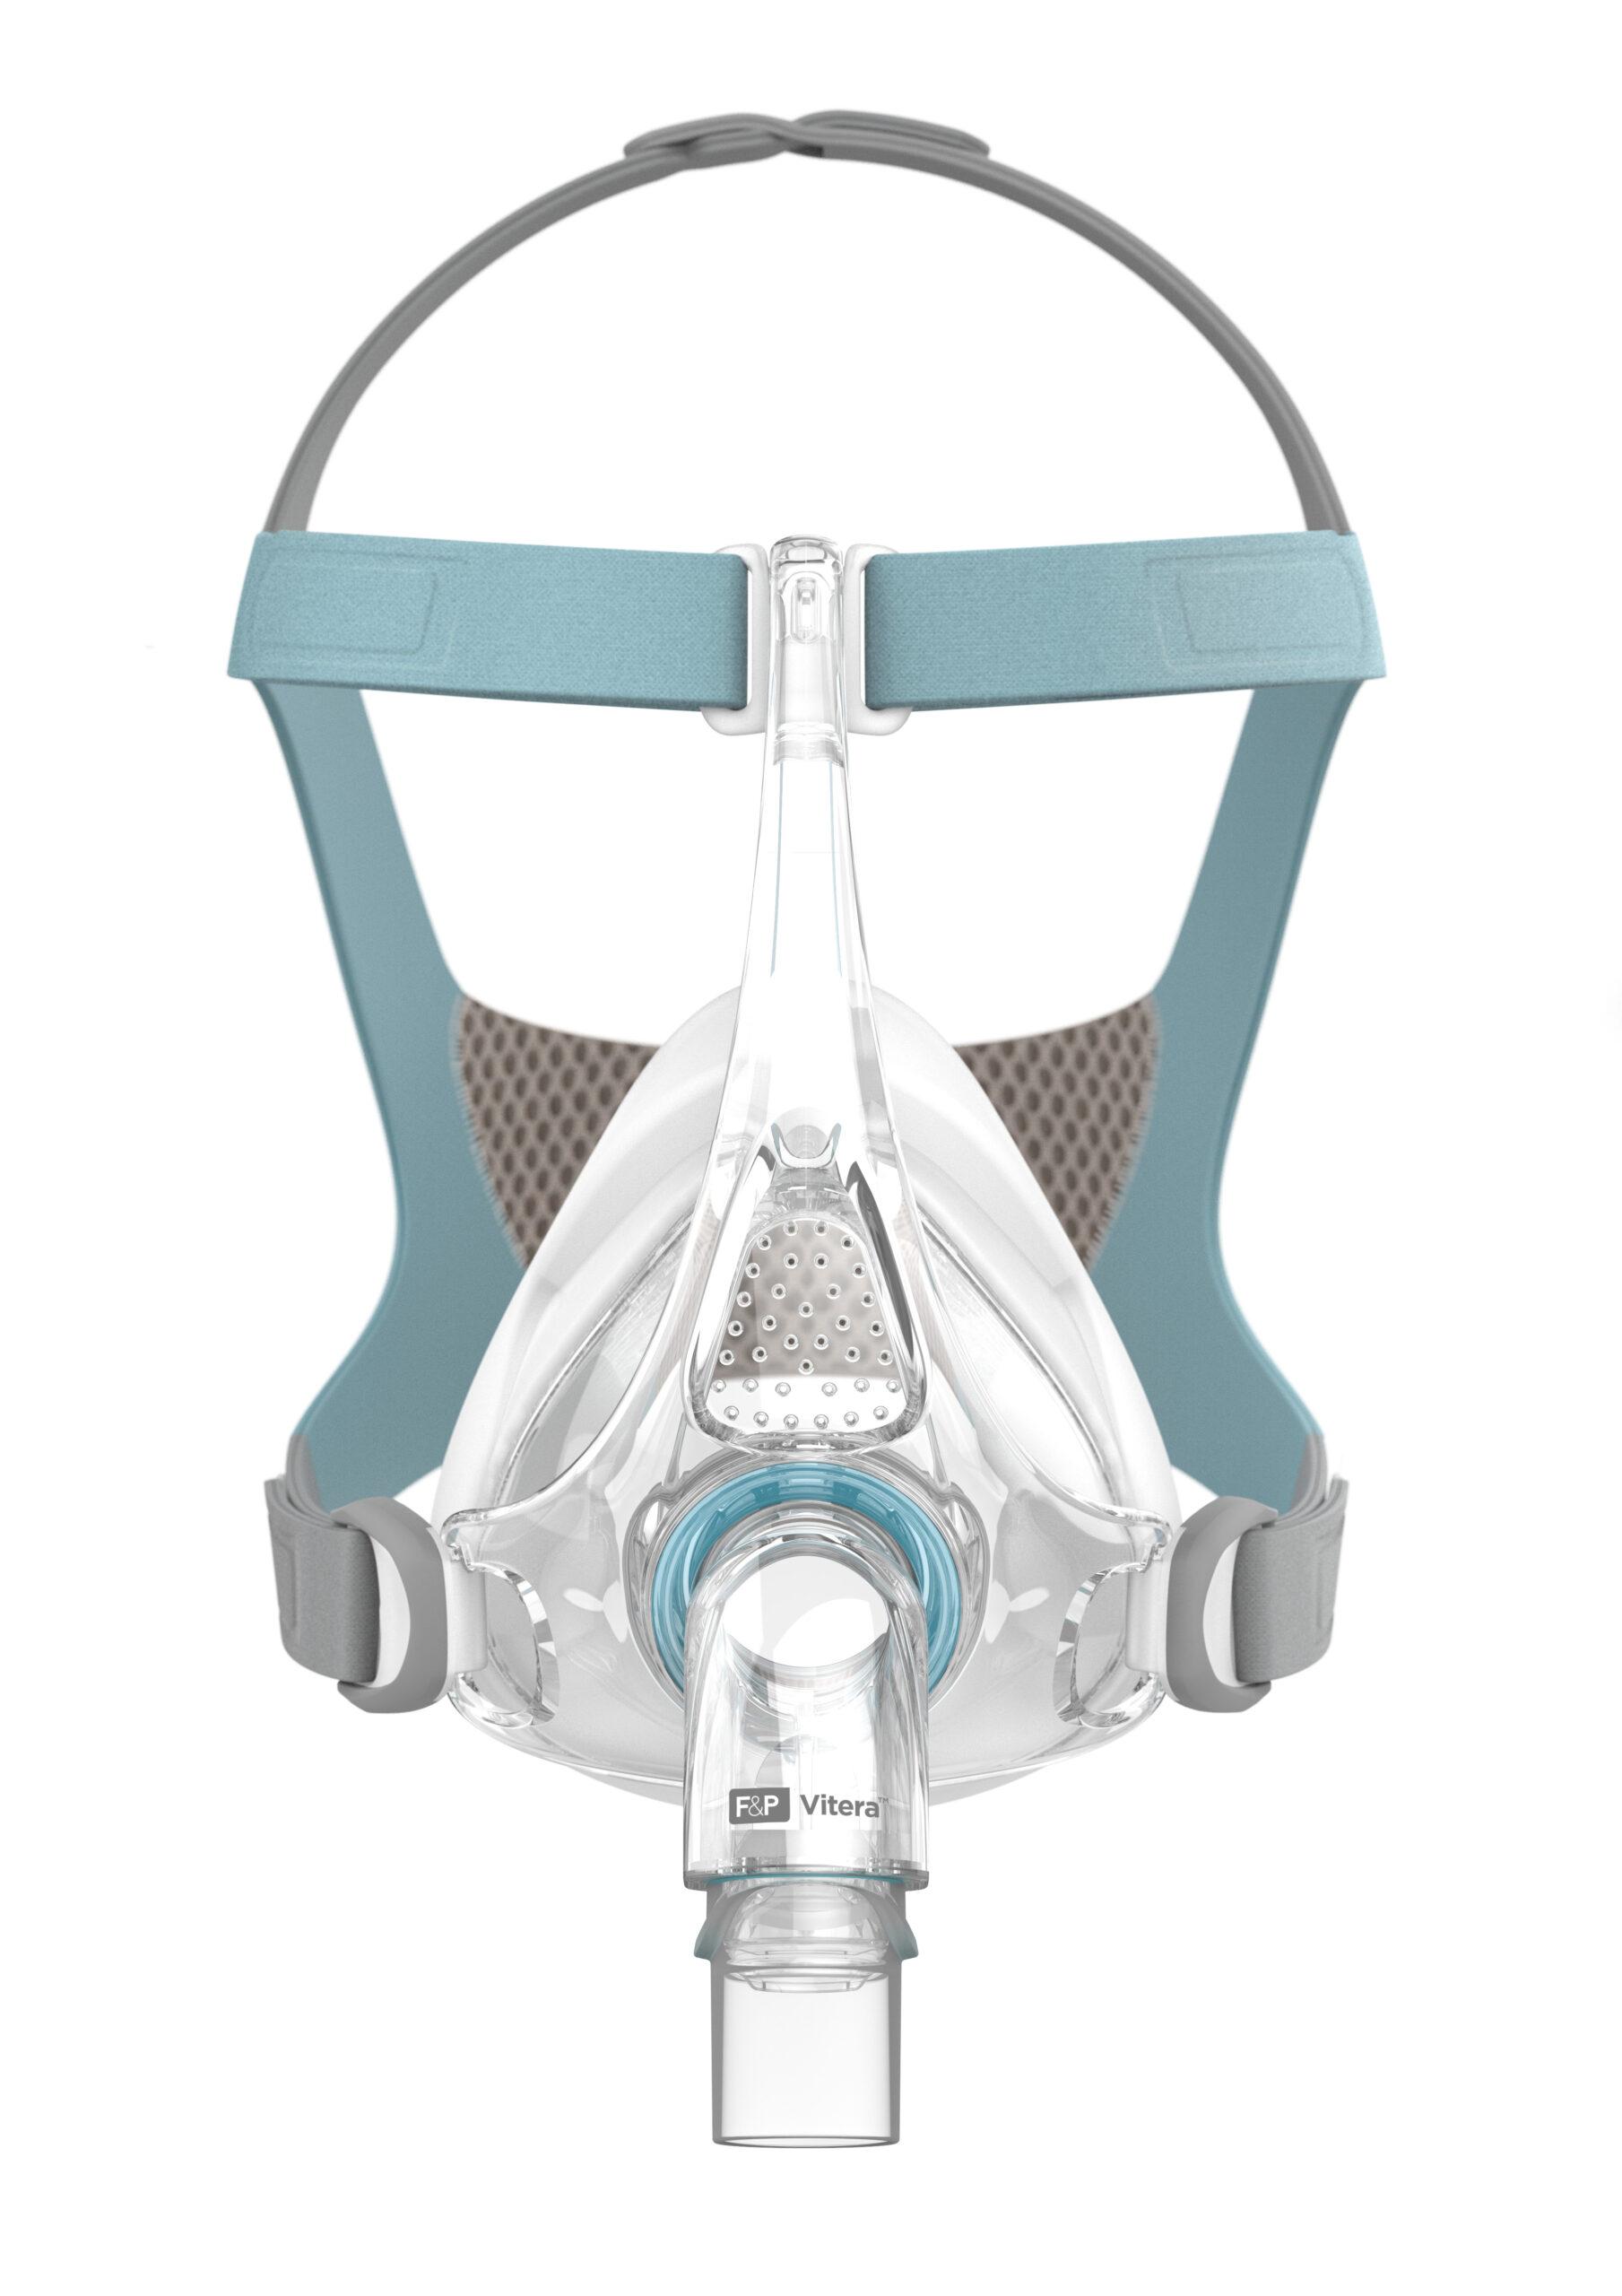 Fisher & Paykel Vitera Full Face Mask – Respiratory Home Services